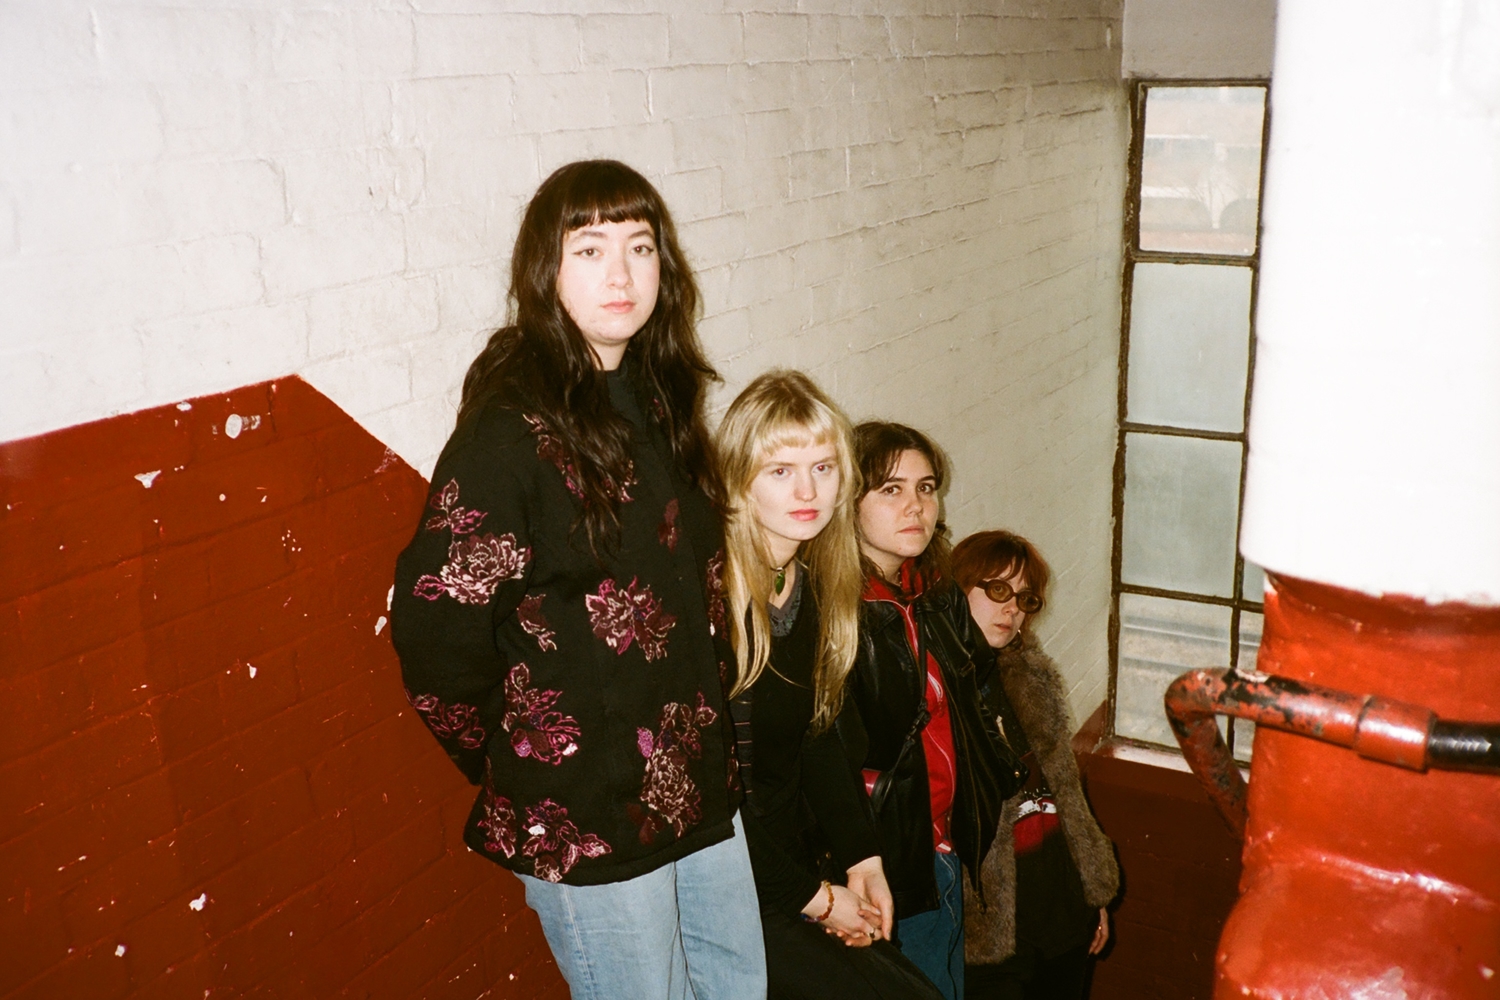 Lime Garden talk Brighton, friendship, and their debut album 'One More Thing'